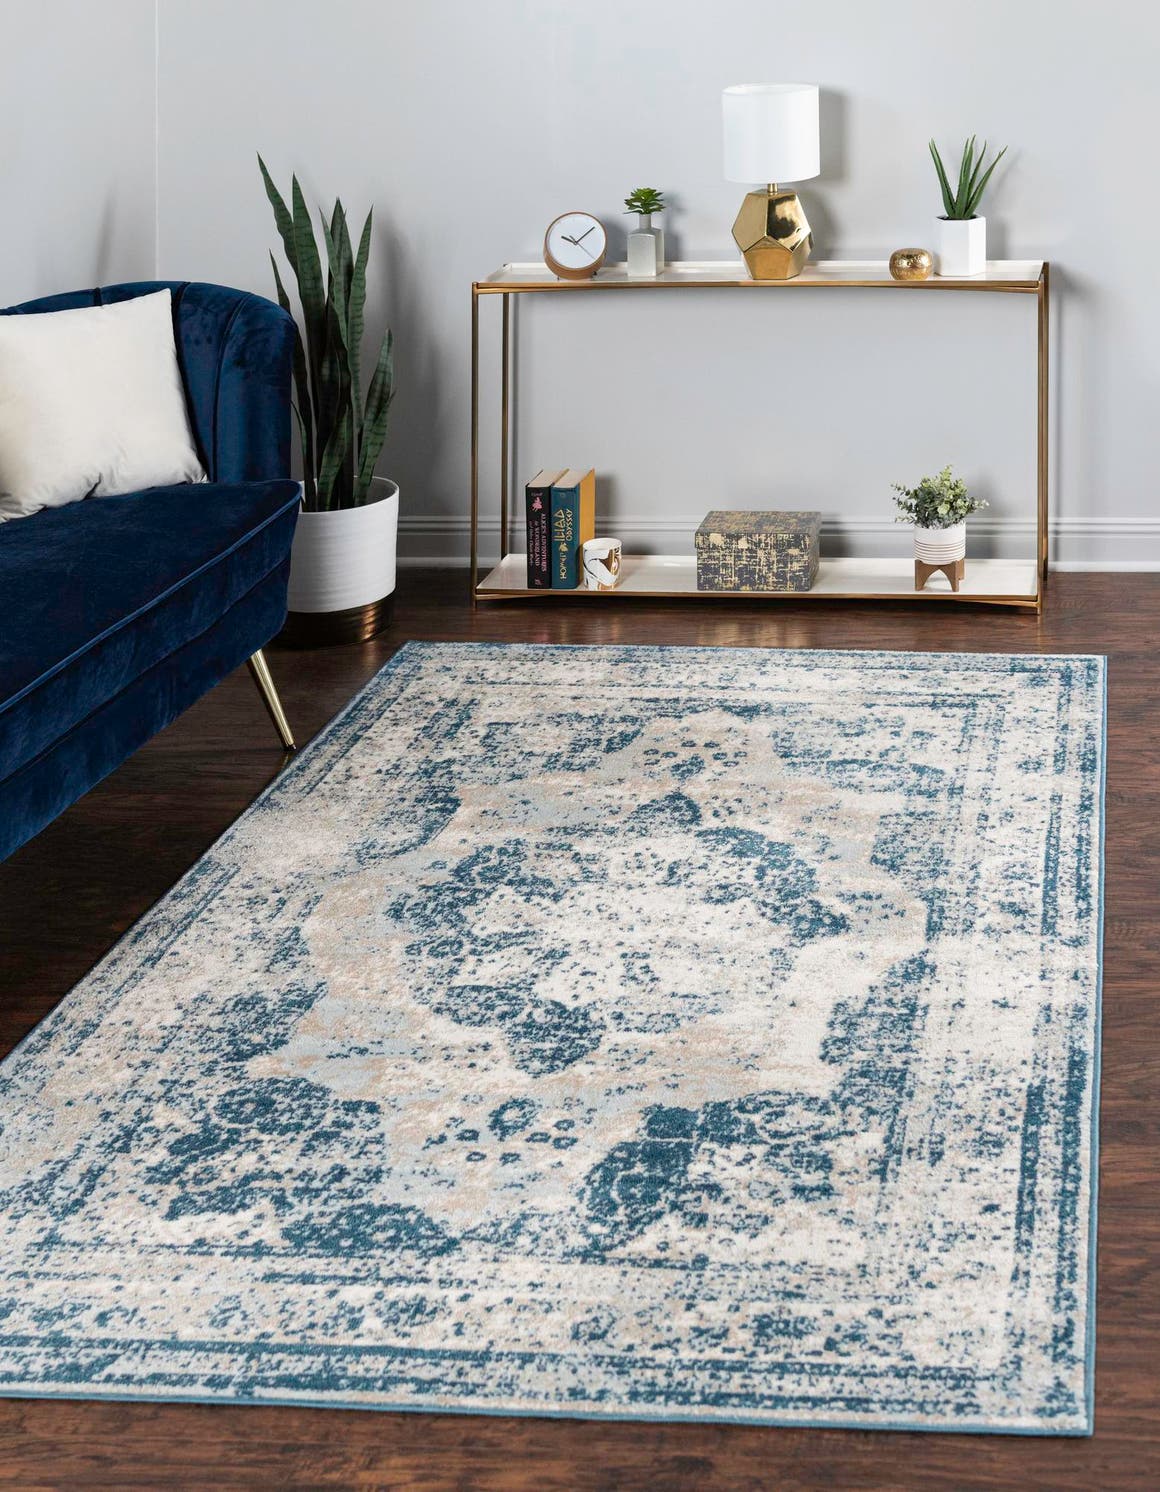 Unique Loom Salle Garnier Sofia Rug Blue/Ivory 7' 10" x 10' Rectangle Border Bohemian Perfect For Living Room Bed Room Dining Room Office - image 1 of 7